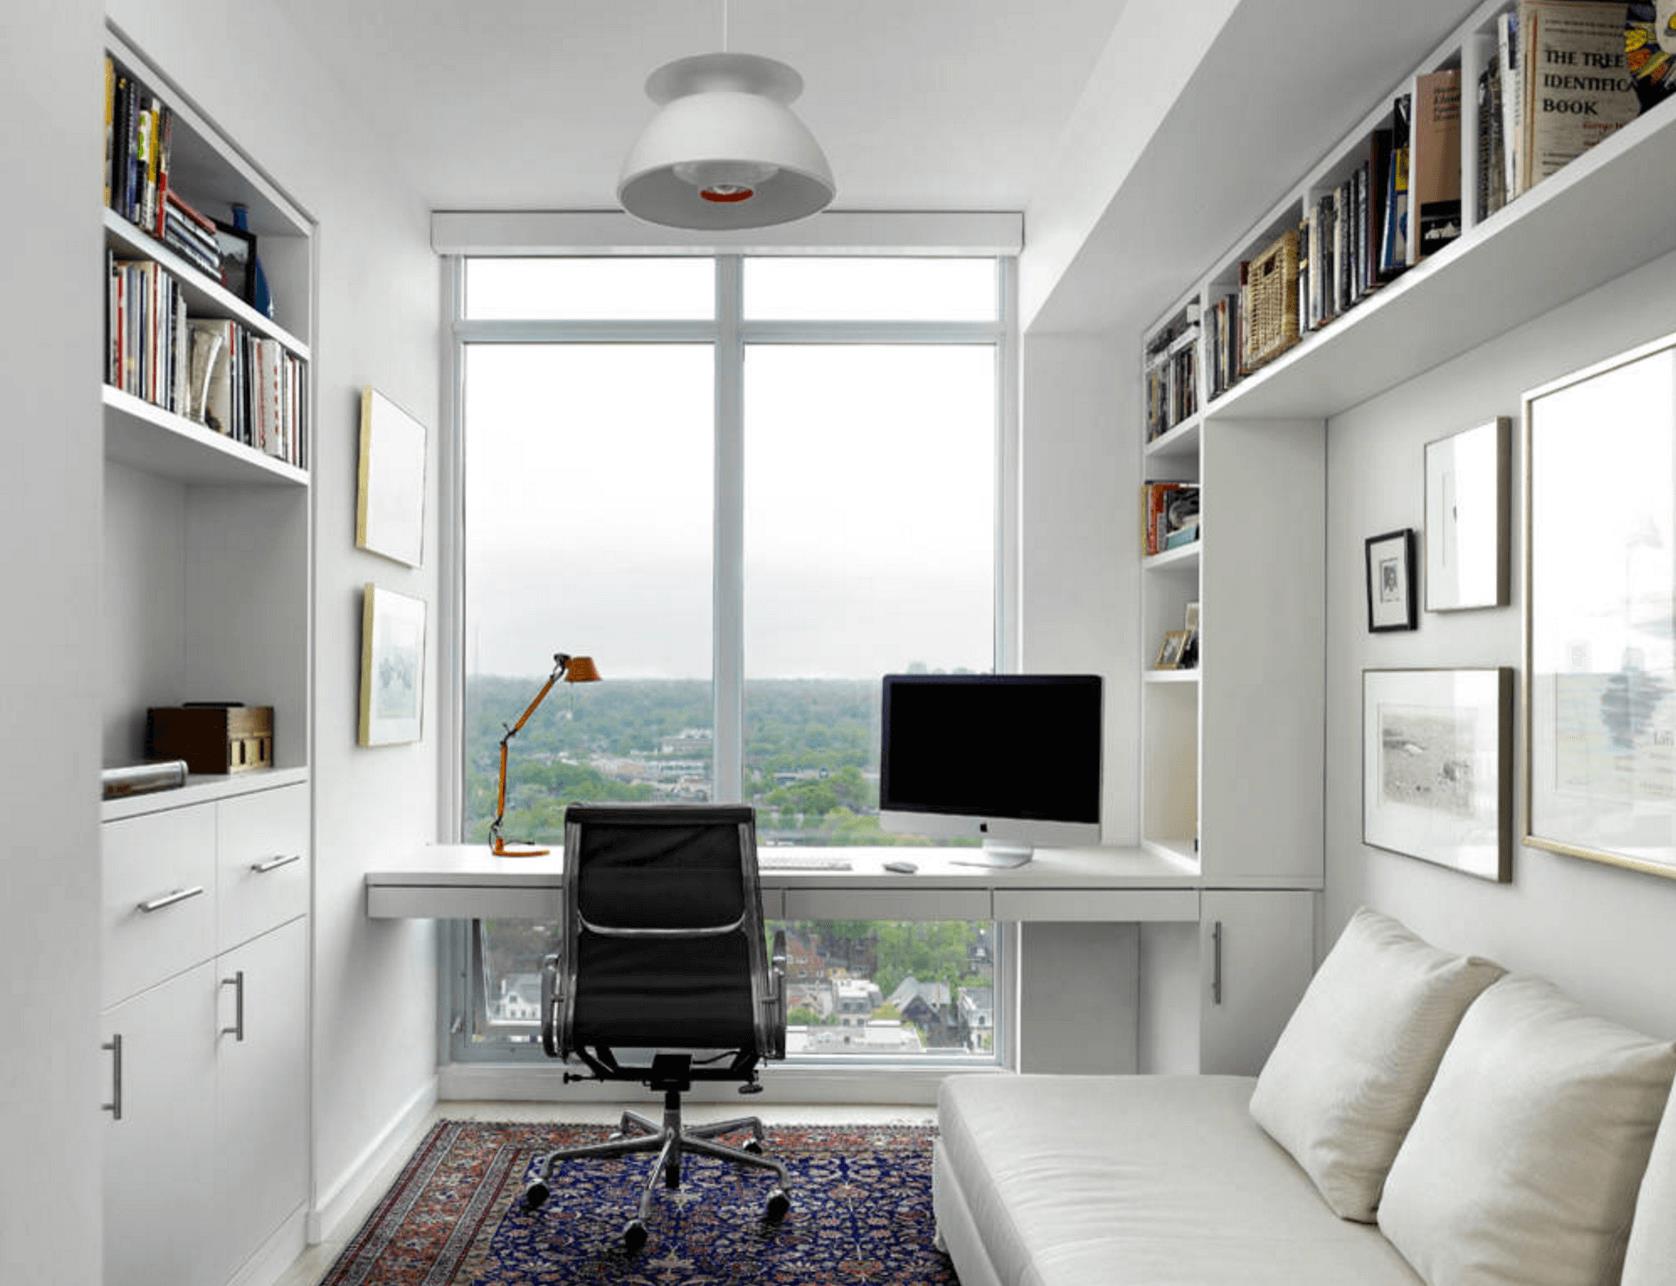 Image of a Home Office